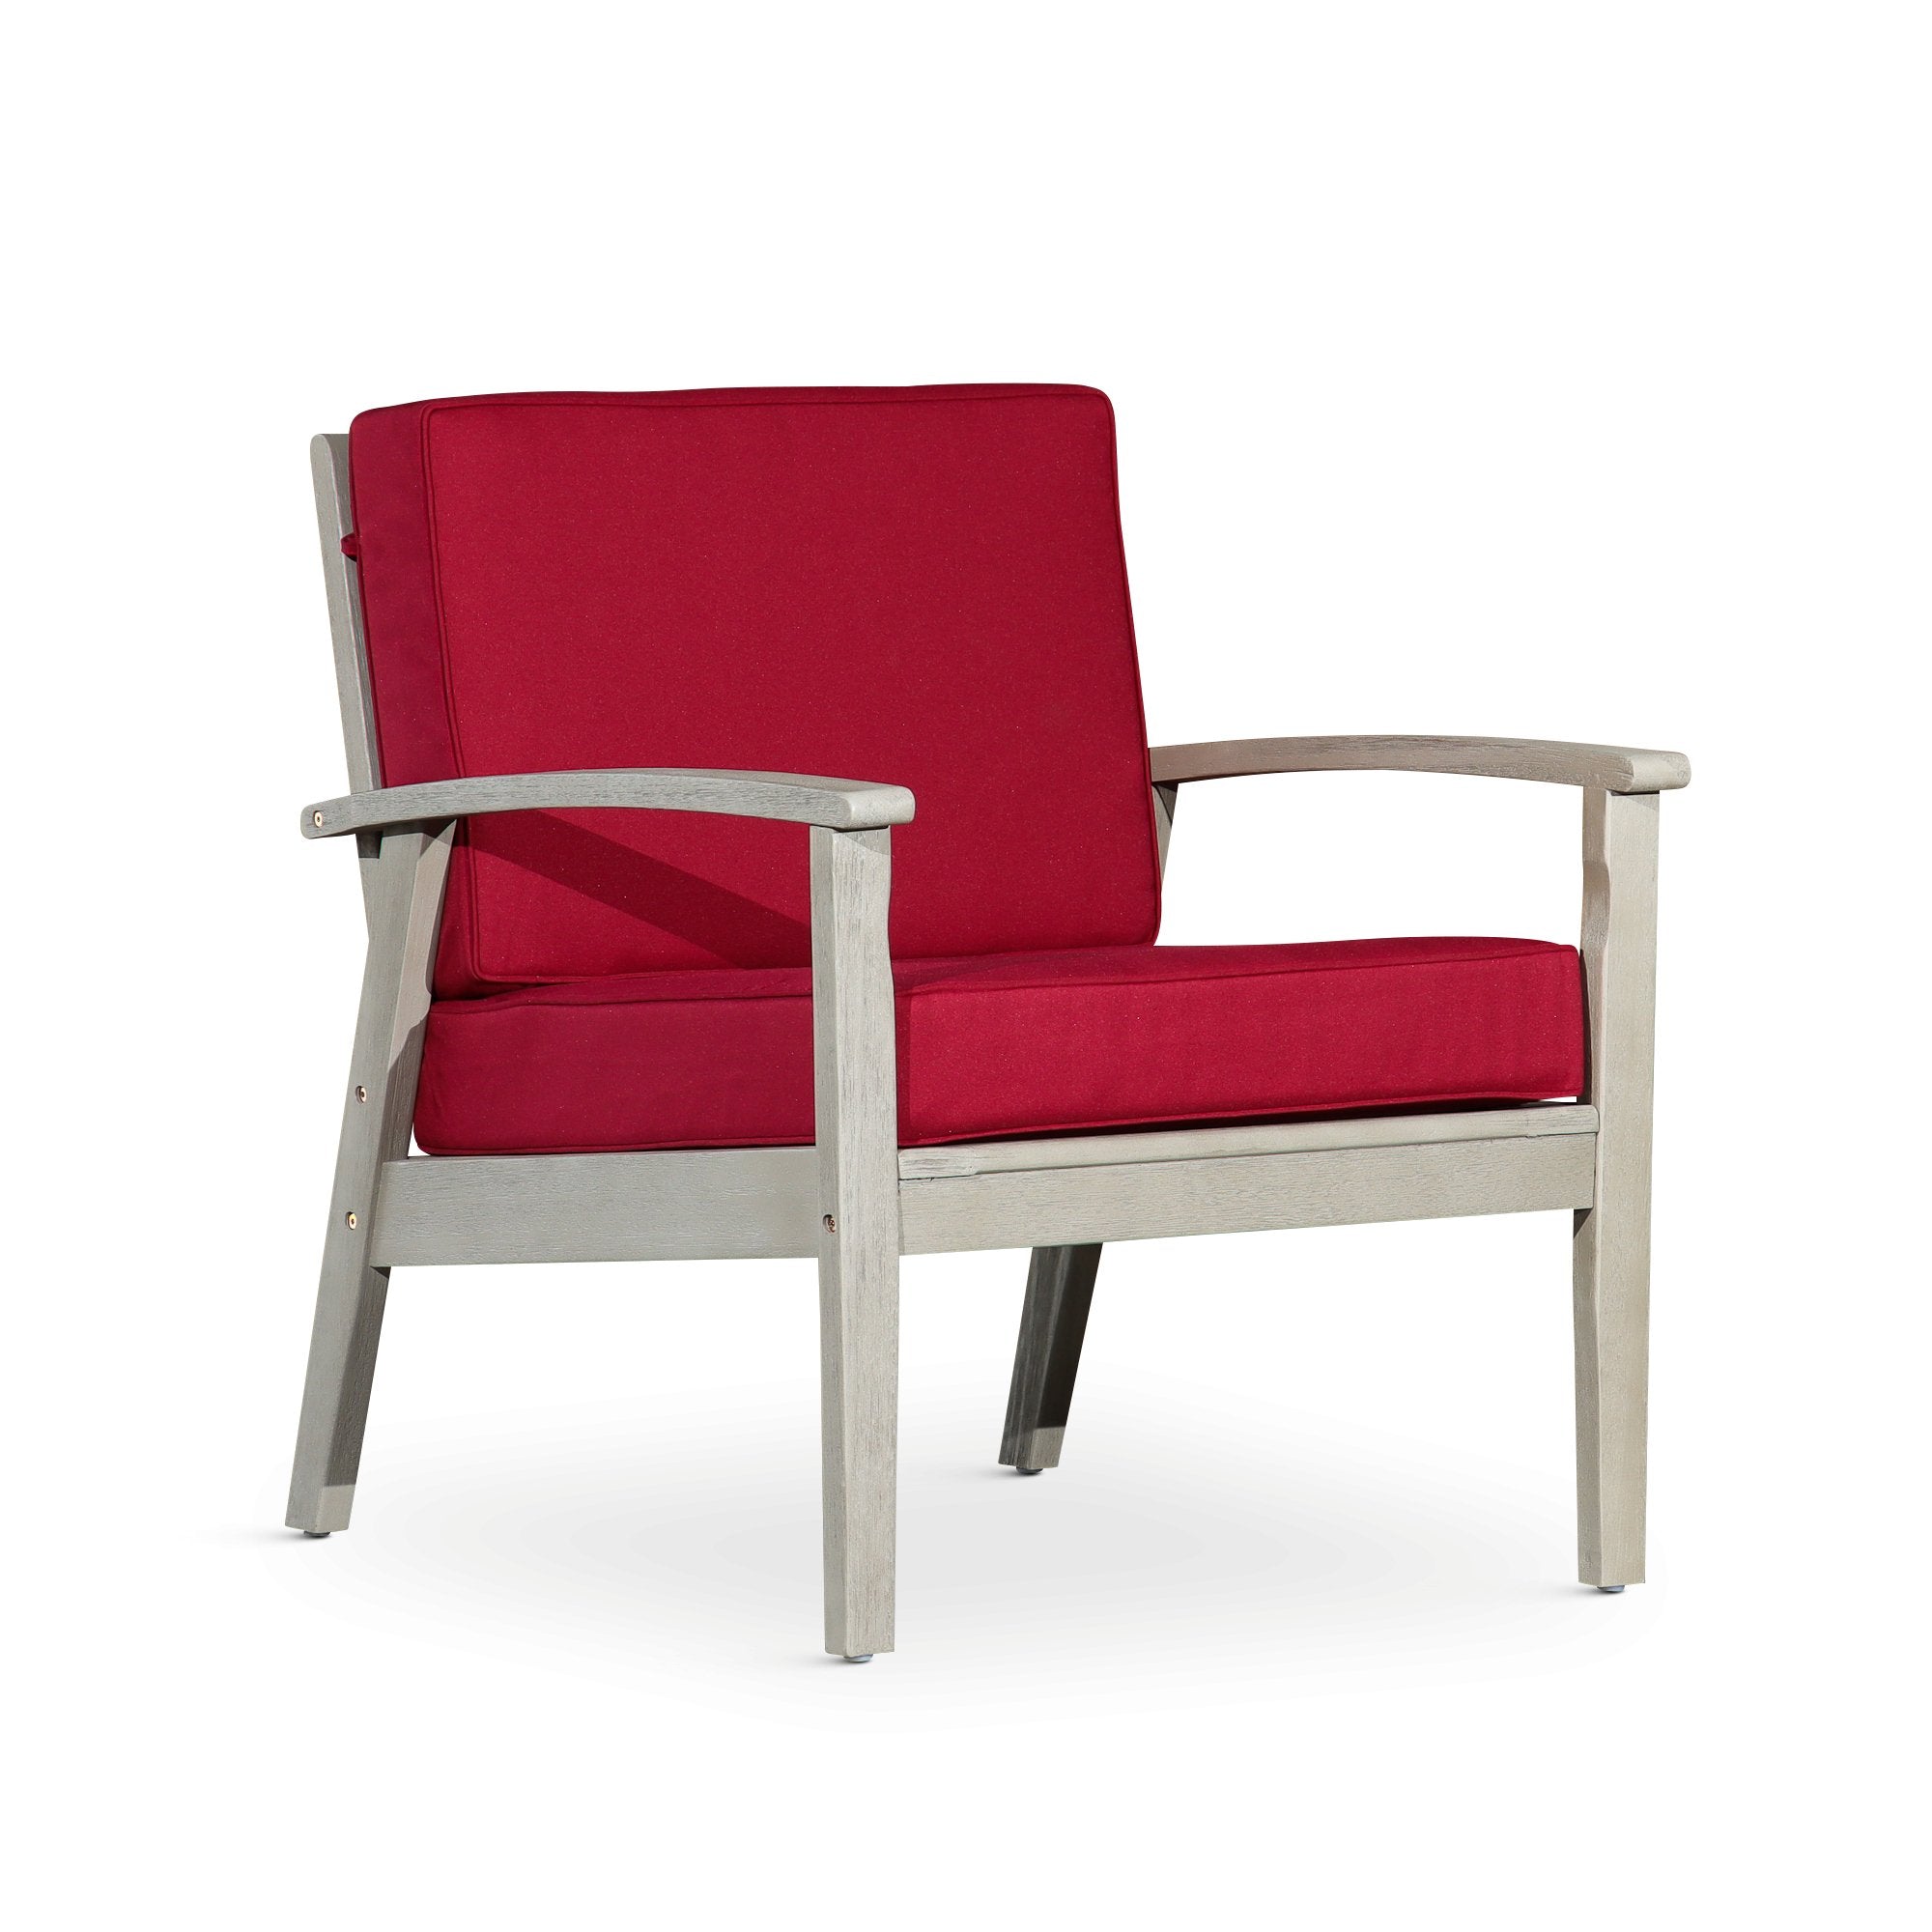 Deep-Seat-Outdoor-Chair,-Driftwood-Gray-Finish,-Burgundy-Cushions-Outdoor-Chairs